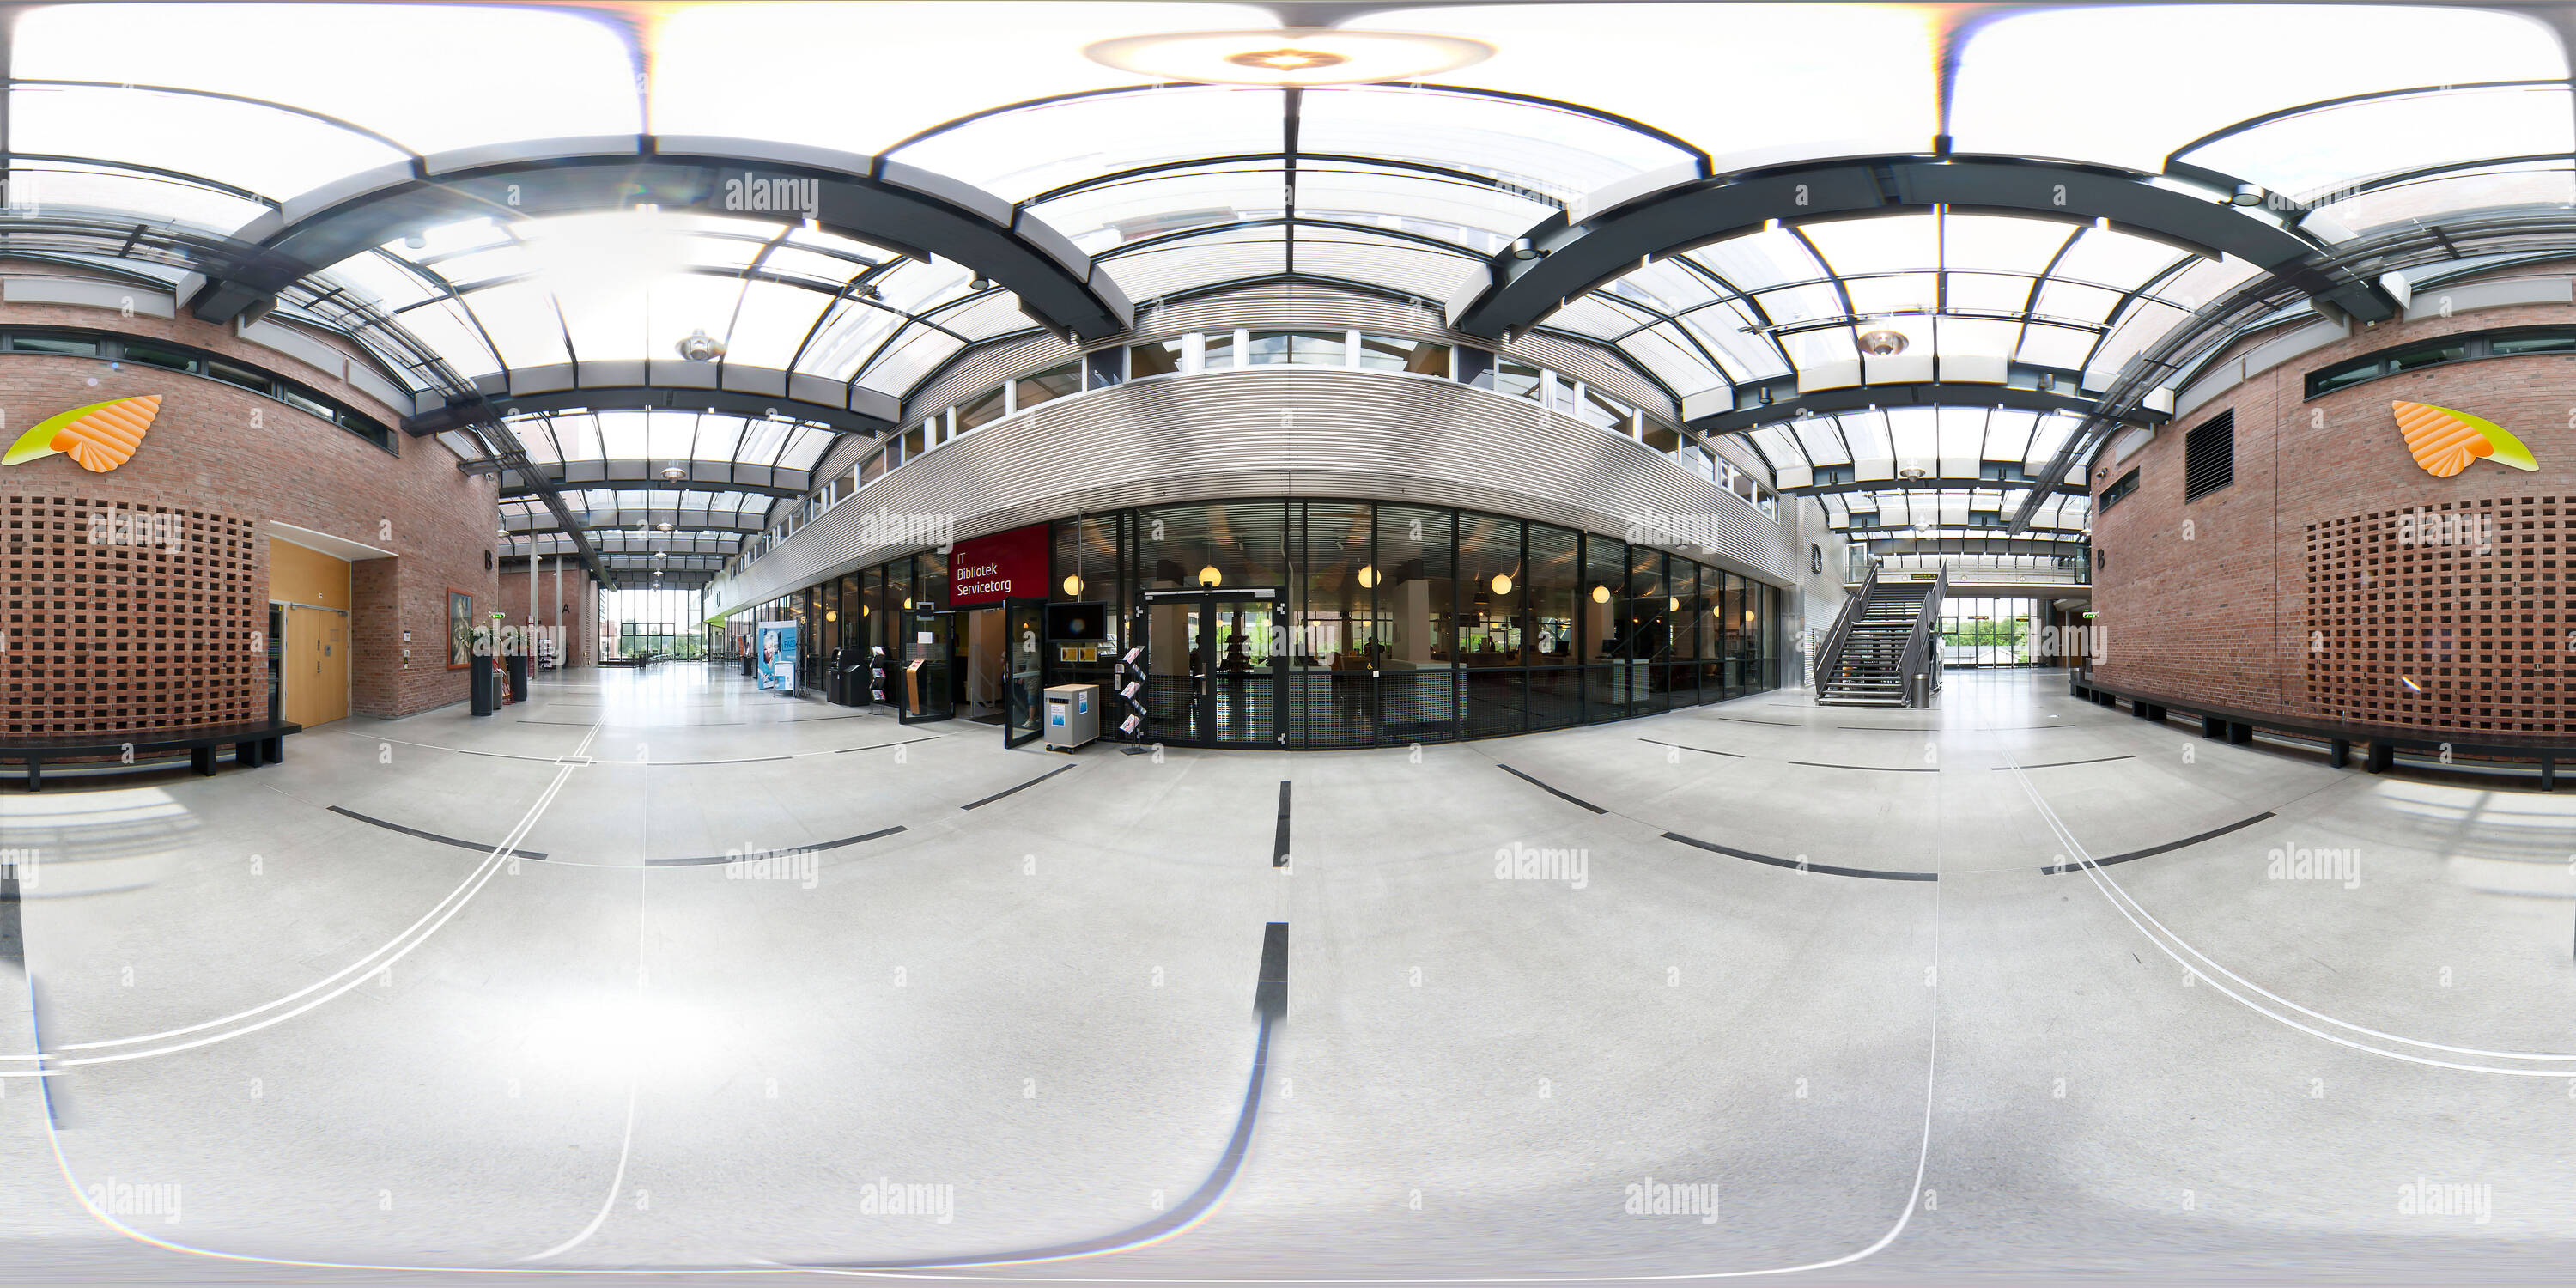 360° view of UIA The University of Agder - Alamy